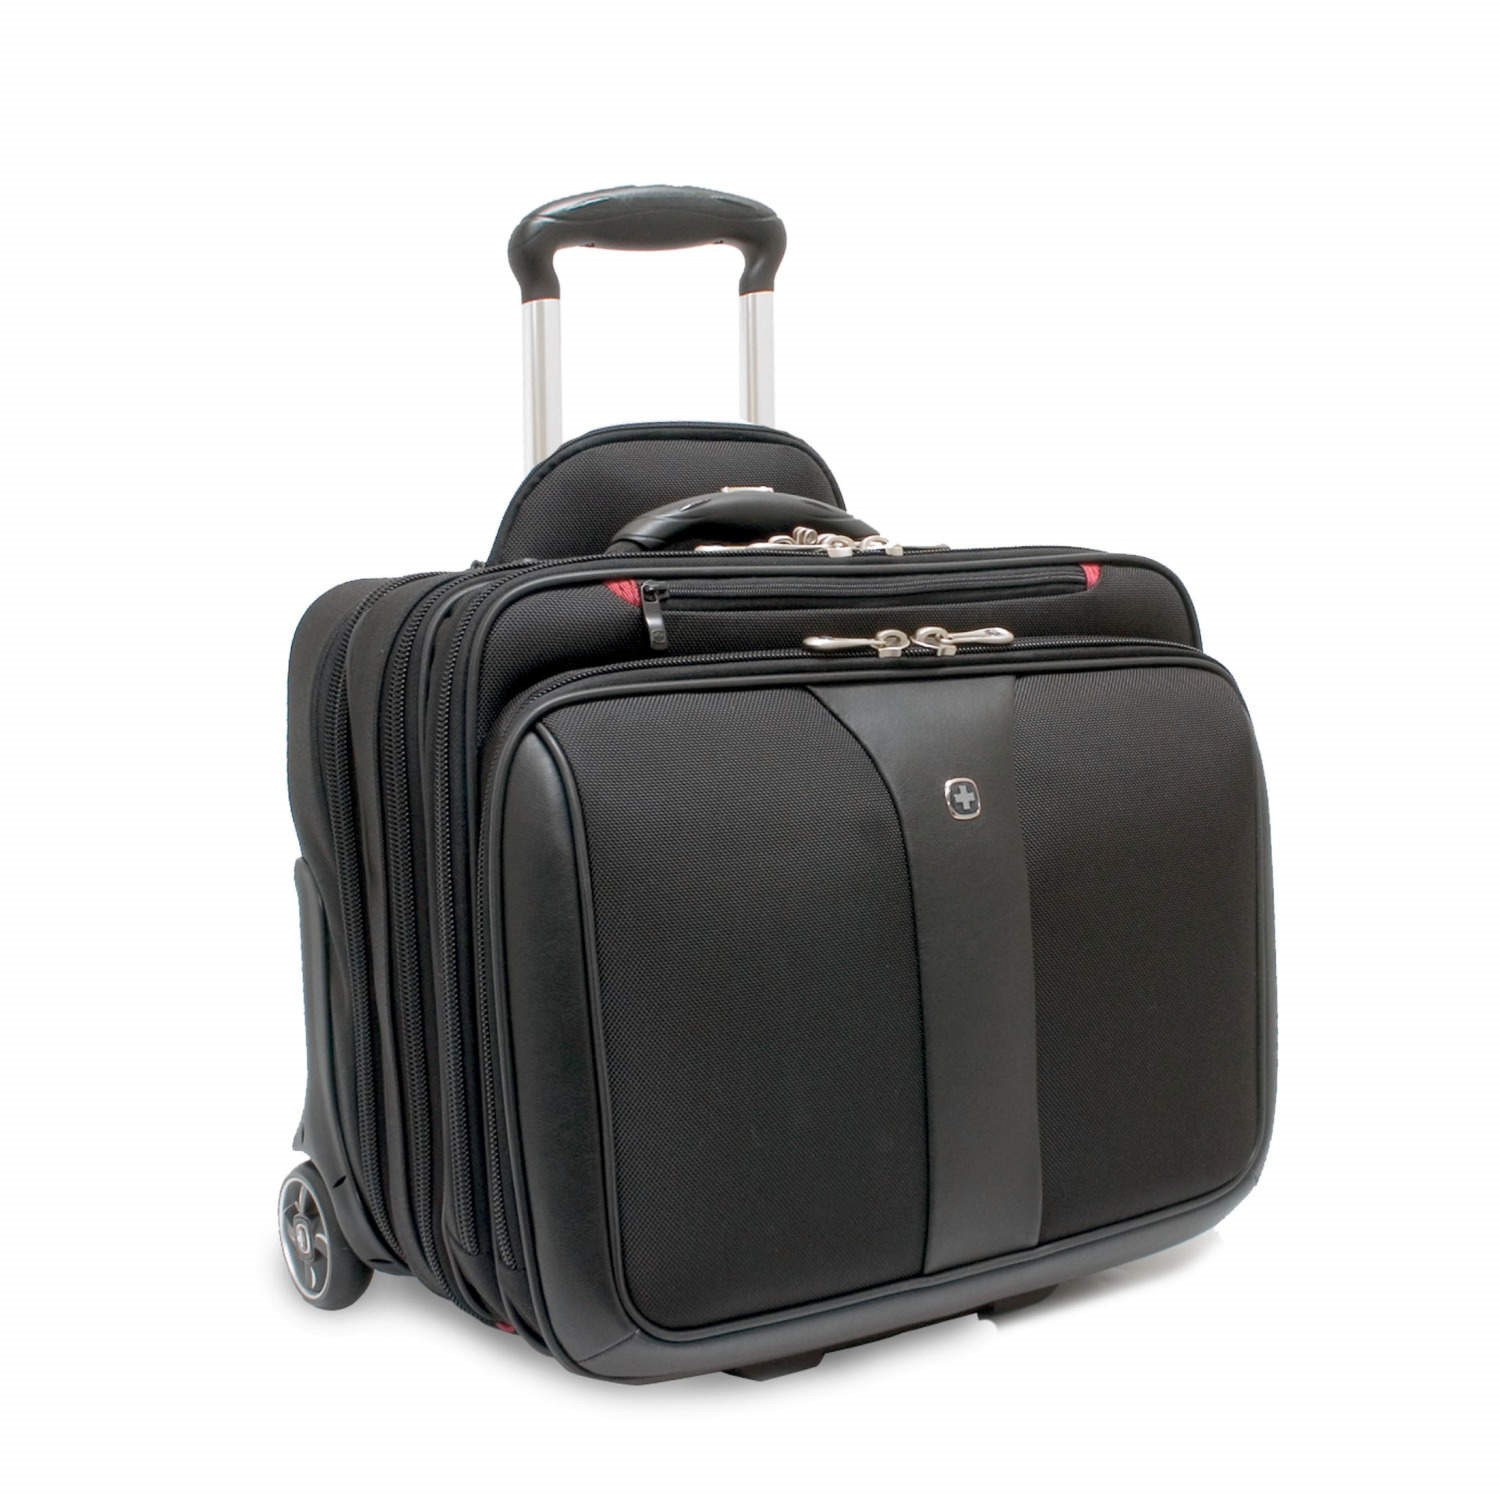 Wenger Swissgear Patriot Roller 2 Piece Travel Set for Laptops up to 17 ...